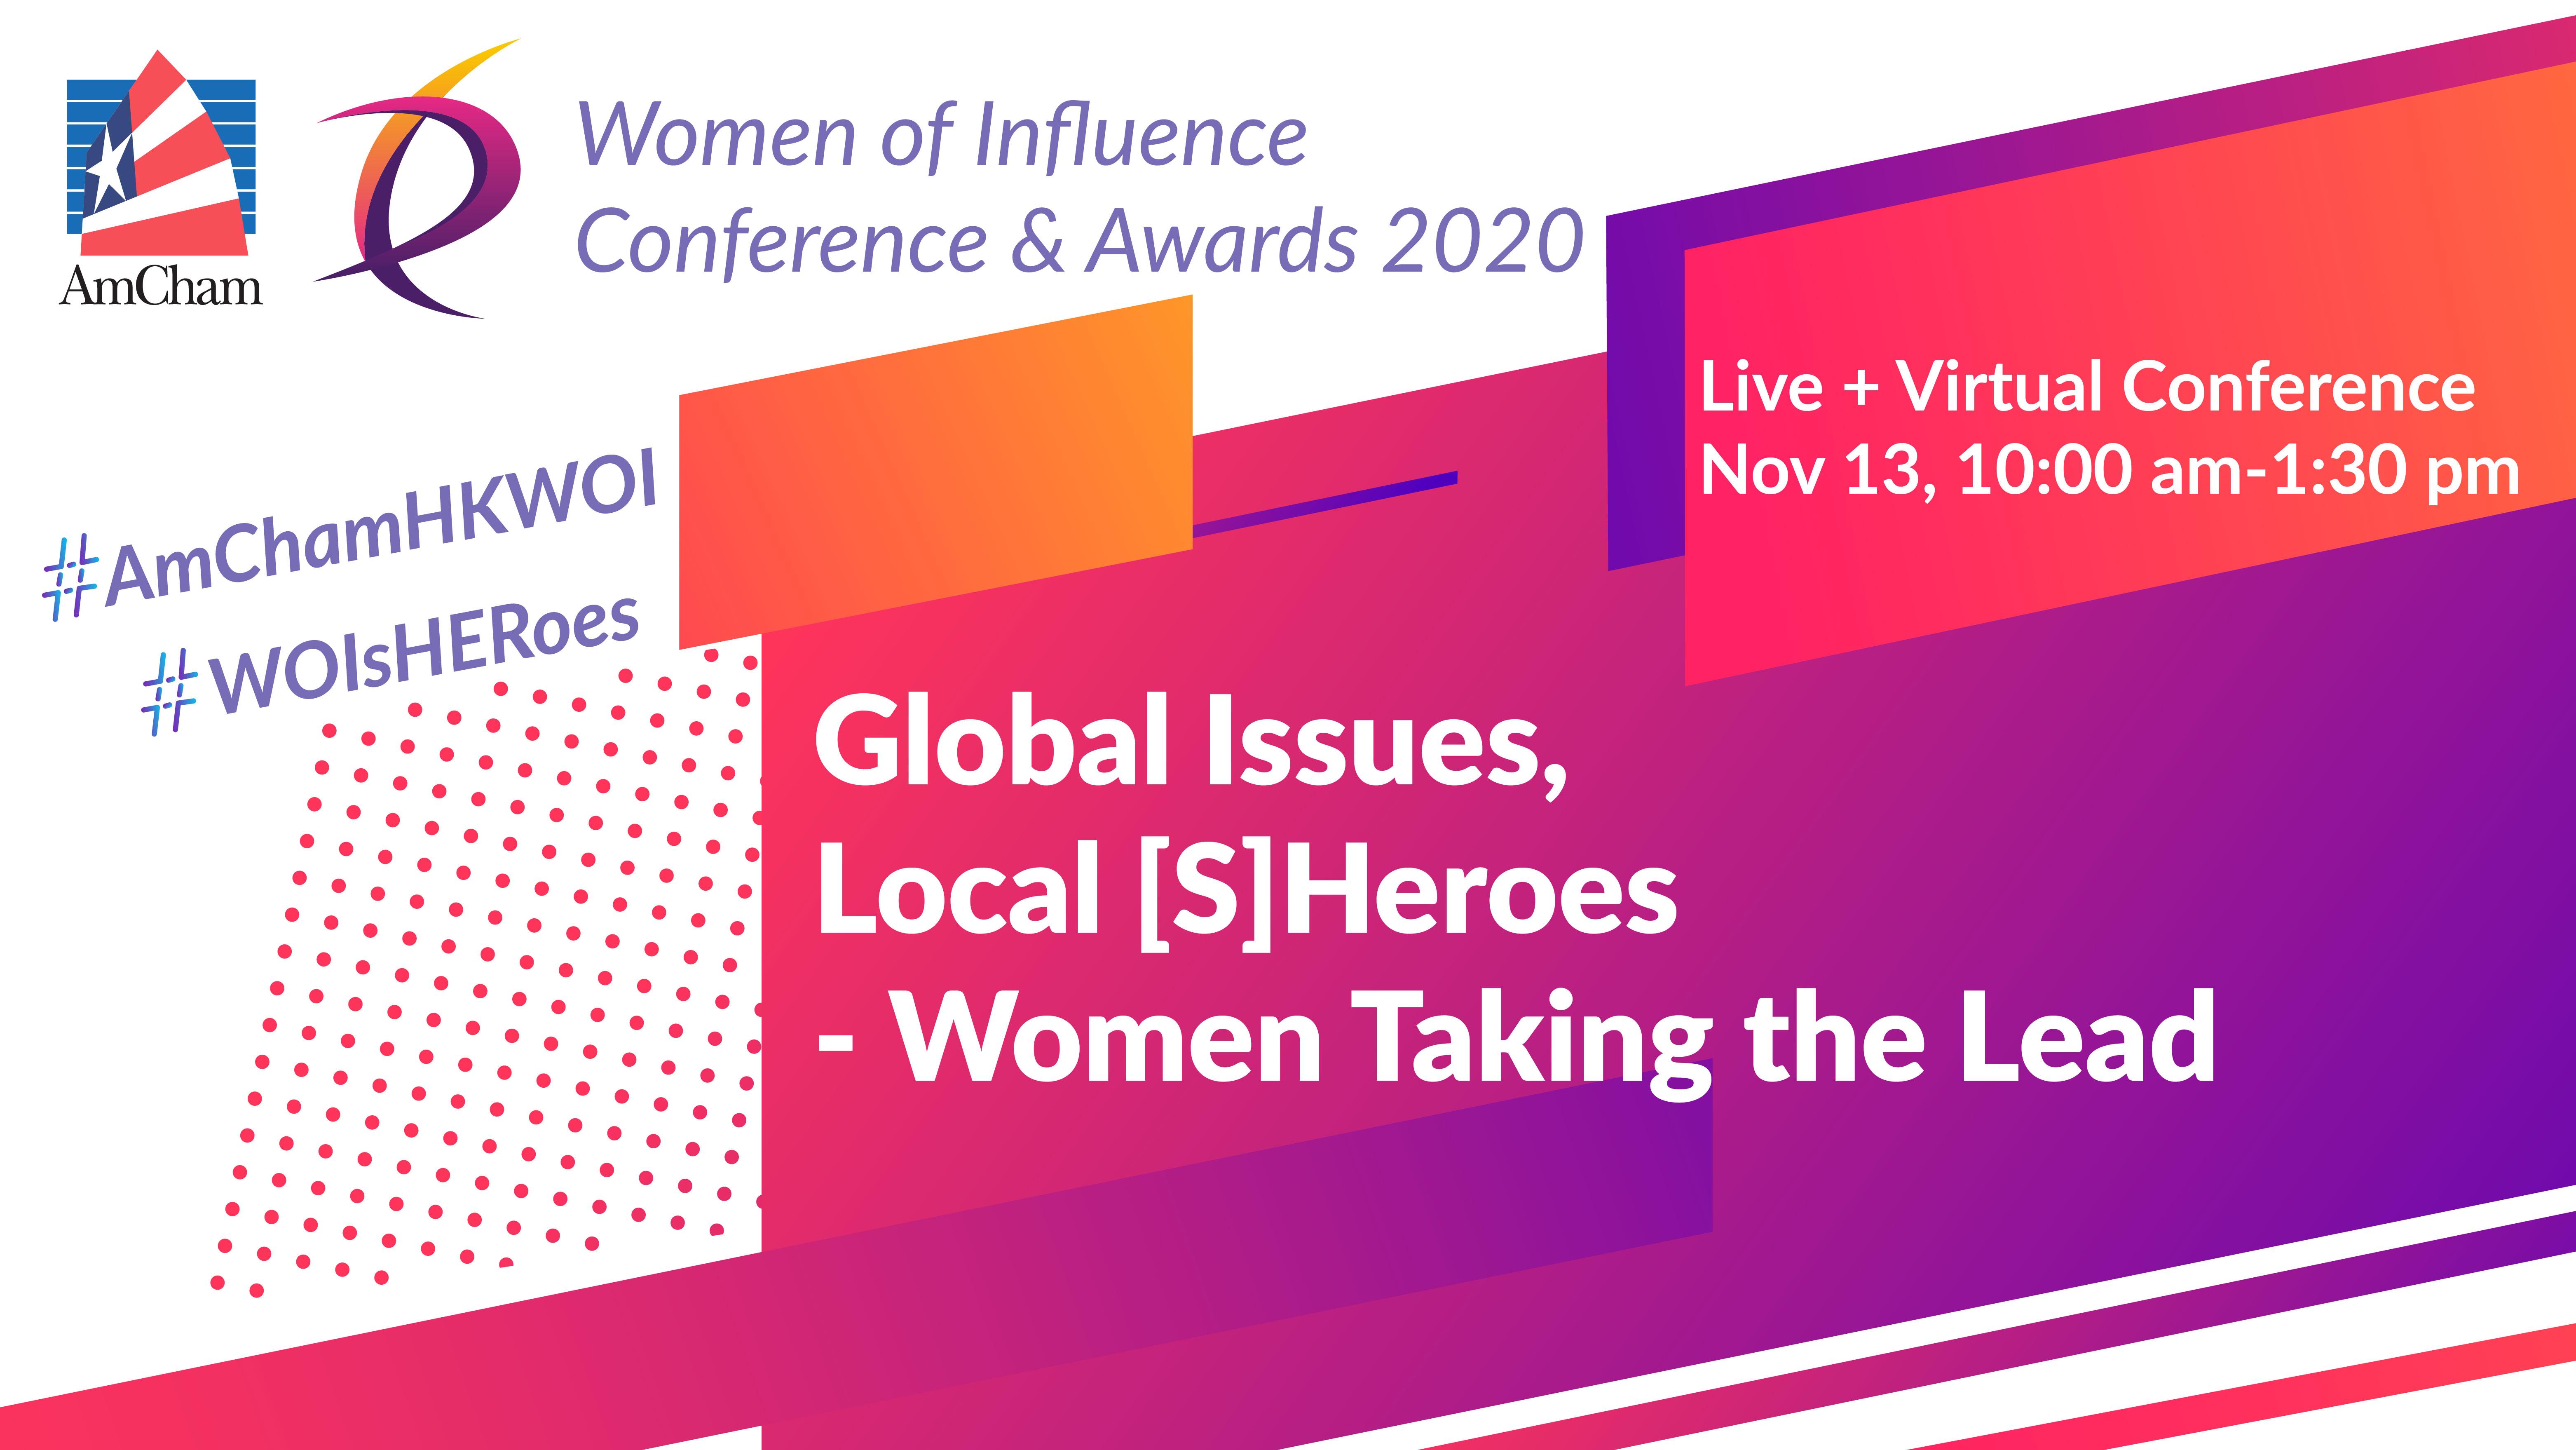 AmCham's 2020 Women of Influence Conference & Awards The Women's